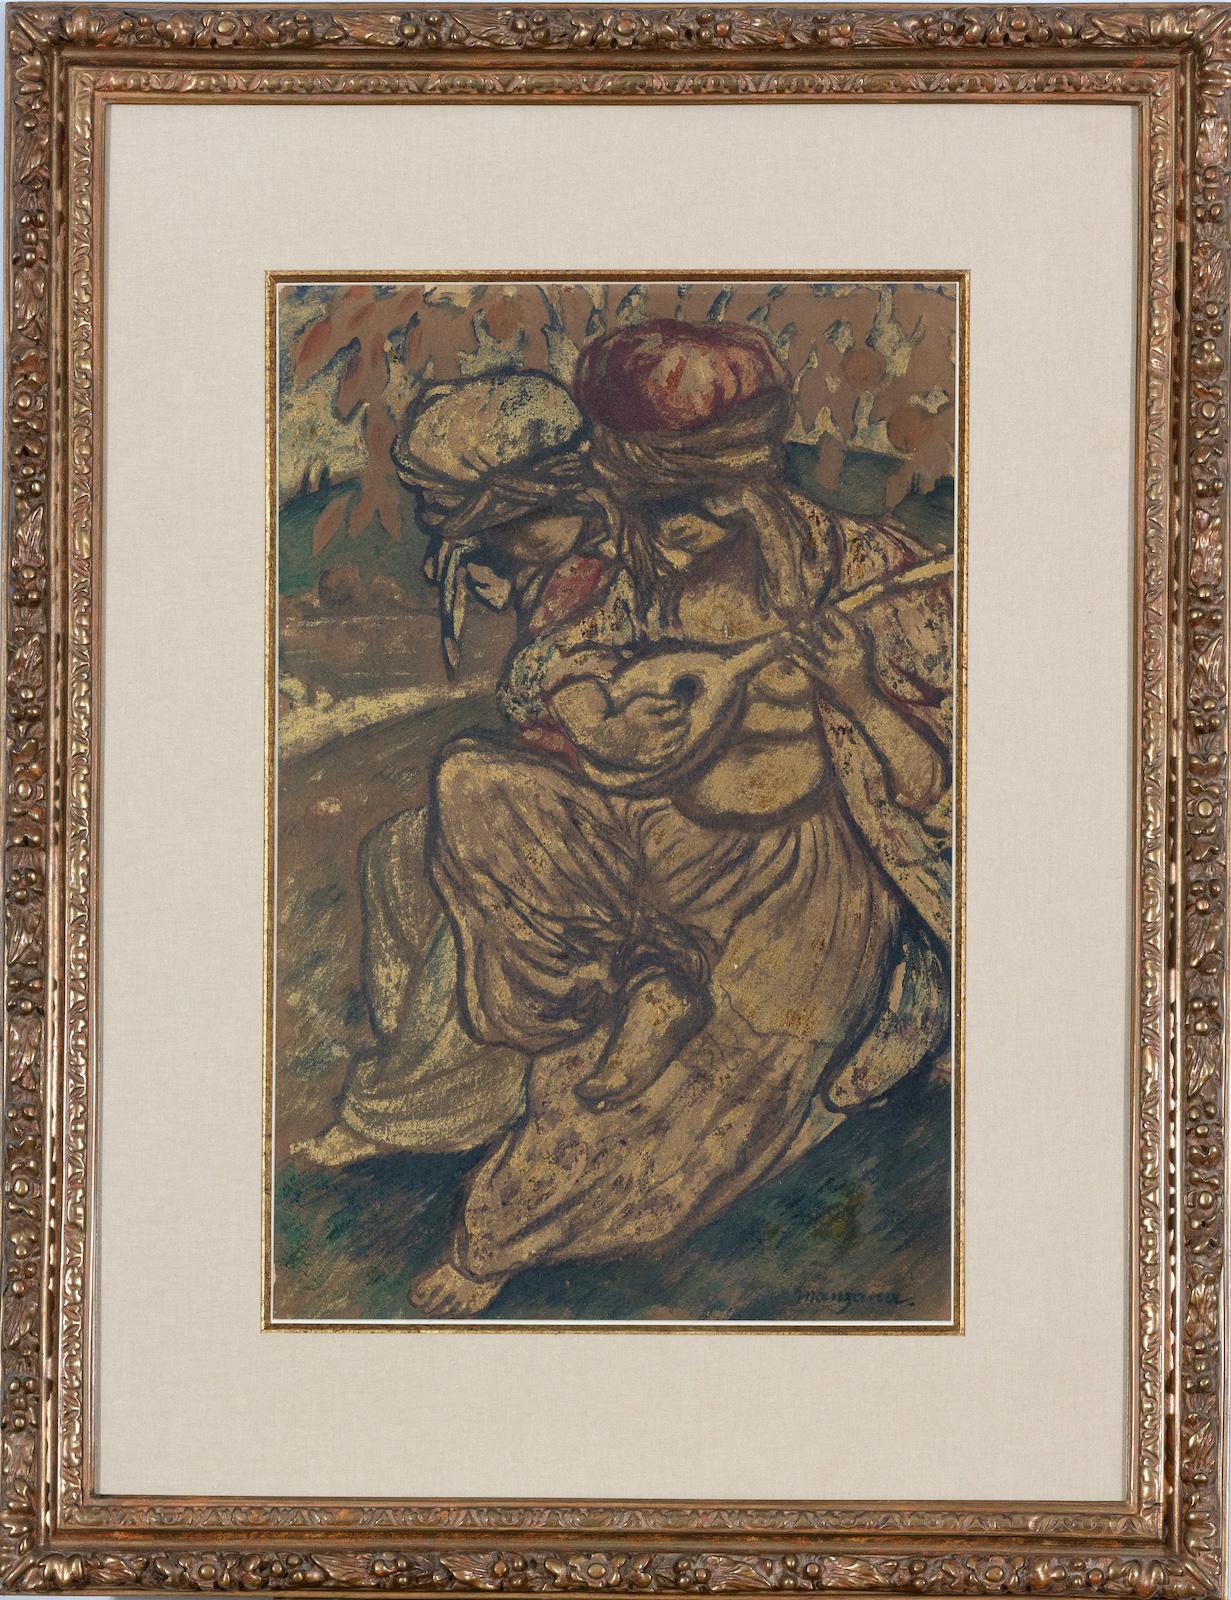 Femme à la mandoline by Georges Manzana Pissarro (1871-1961)
Mixed media on paper
48 x 31 cm (18 ⁷/₈ x 12 ¹/₄ inches)
Signed lower right, manzana.
Executed circa 1910

This work is accompanied by a certificate of authenticity from Lélia Pissarro.